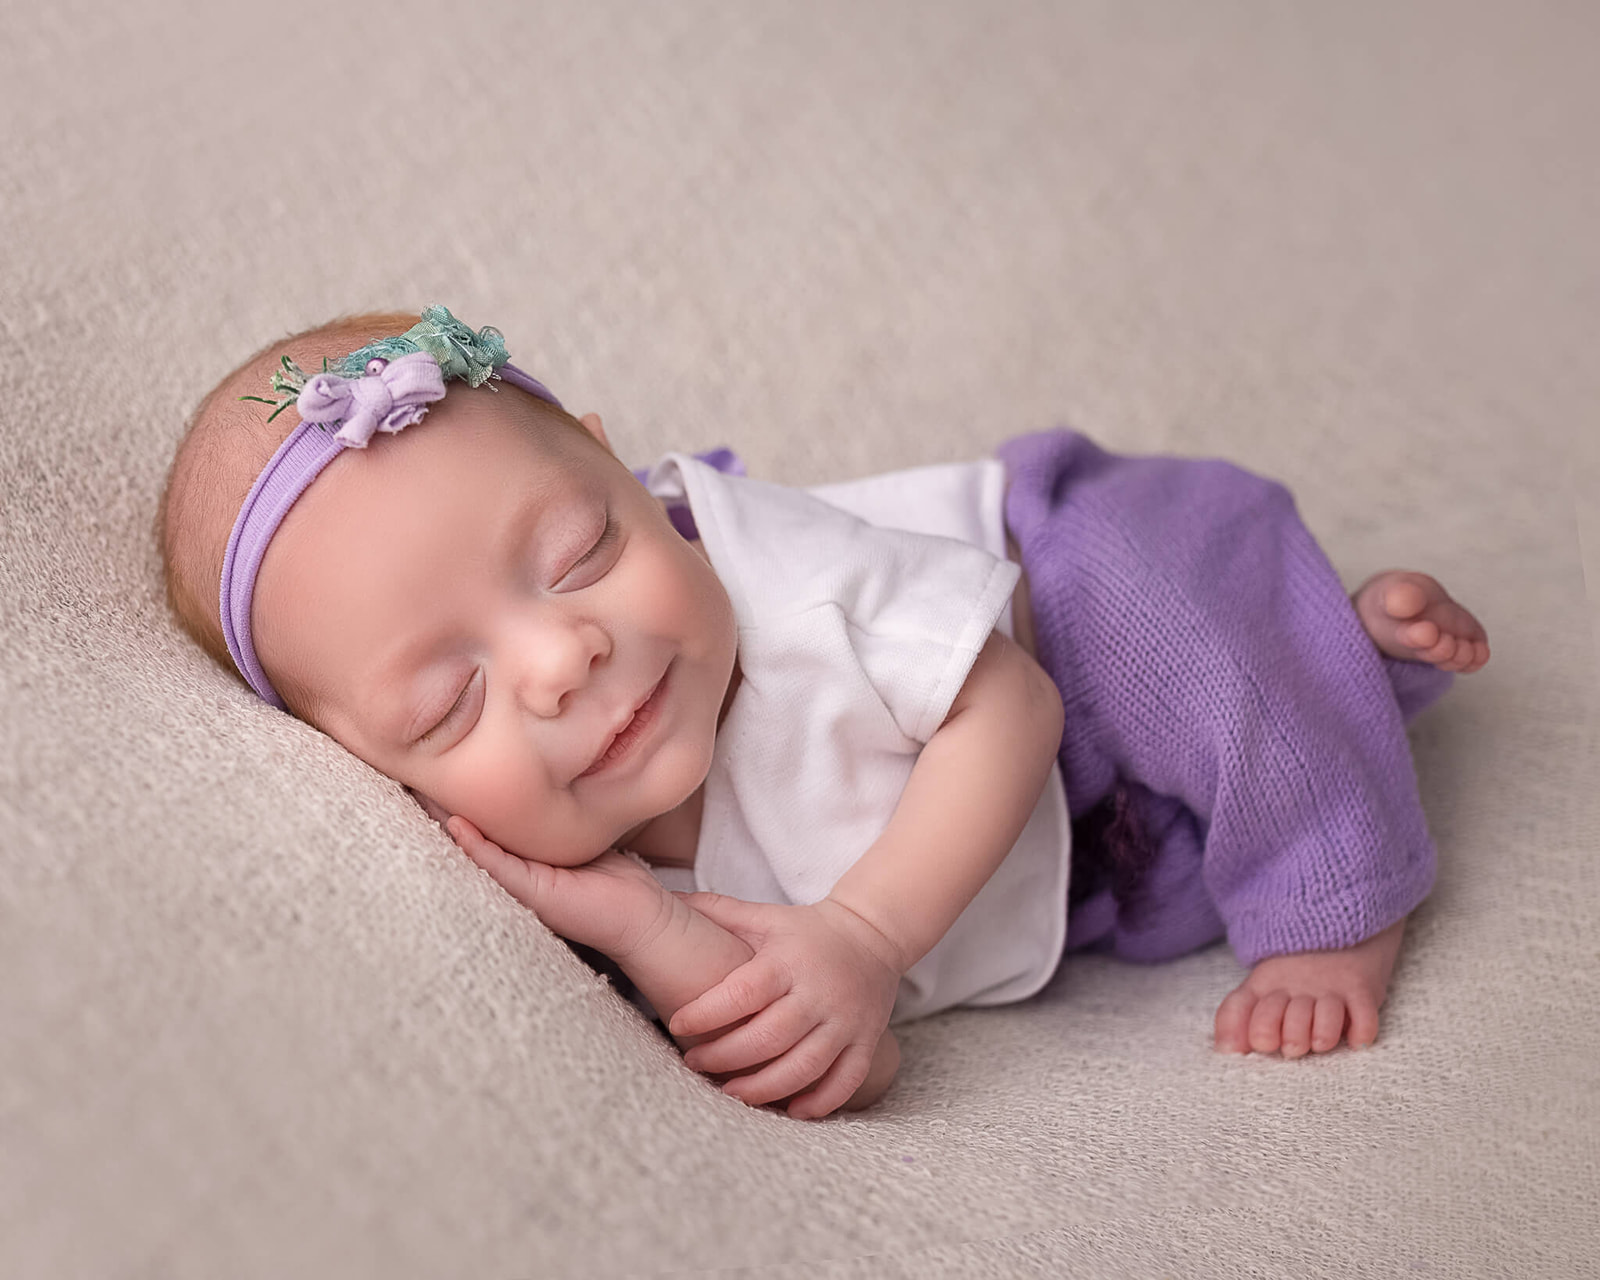 newborn in purple and white outfit sleeping with hand under cheek and smiling during newborn photography session